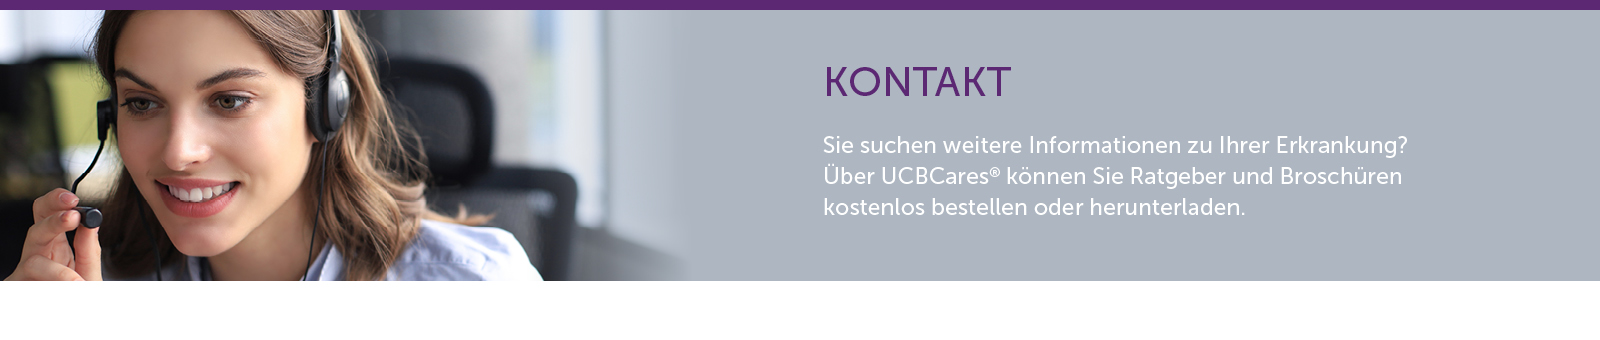 banner_ucbcares